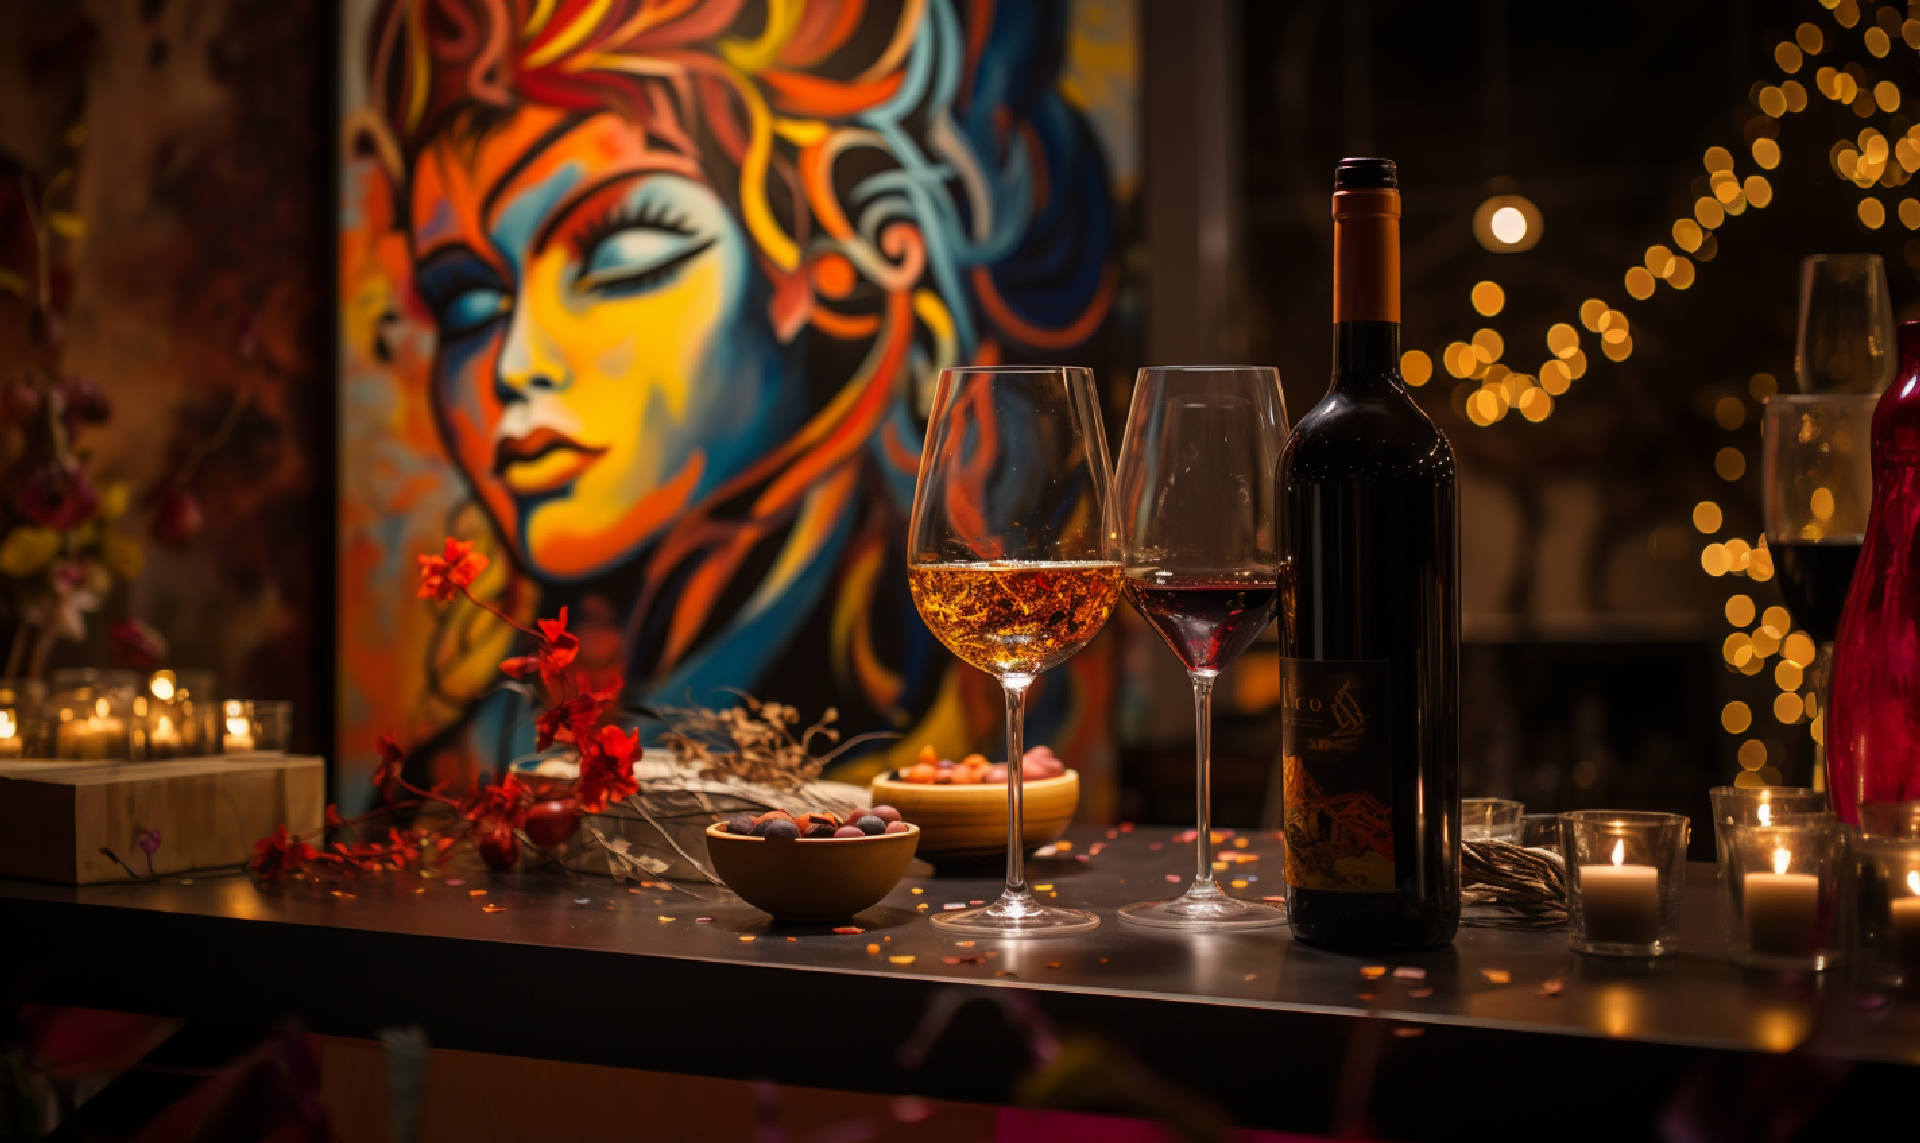 Elegant setting of a wine tasting event with diverse wine glasses, capturing the essence of artistry in wine culture, in the exotic and professional atmosphere of an Anarcho-punk genre.